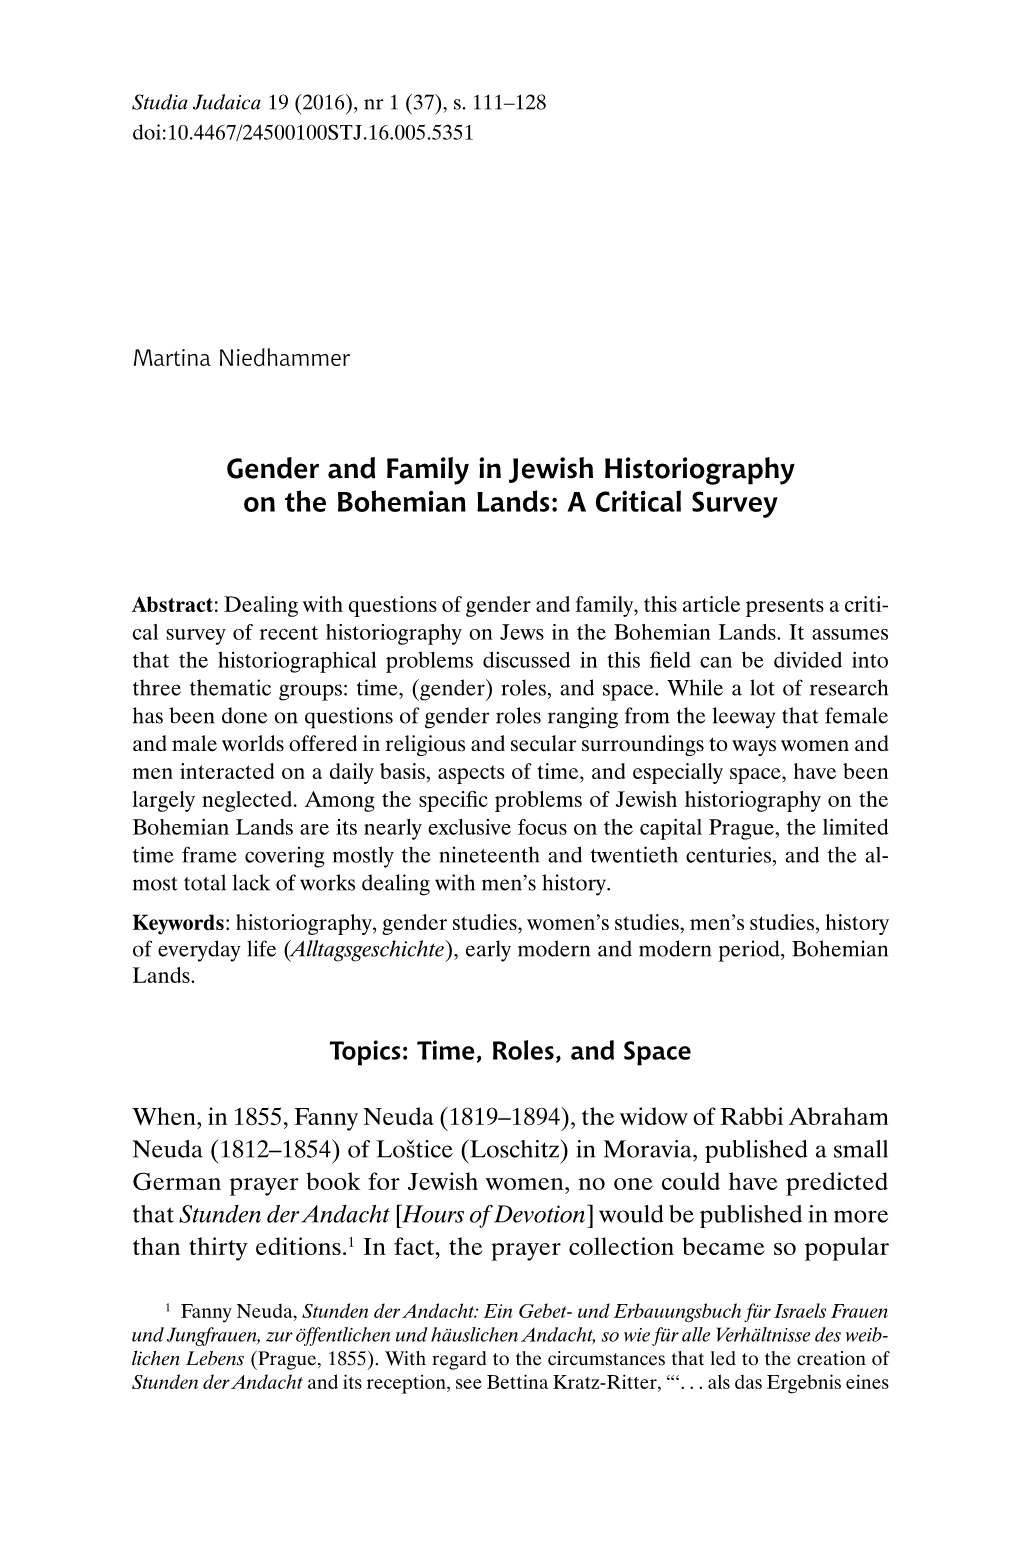 Gender and Family in Jewish Historiography on the Bohemian Lands: a Critical Survey